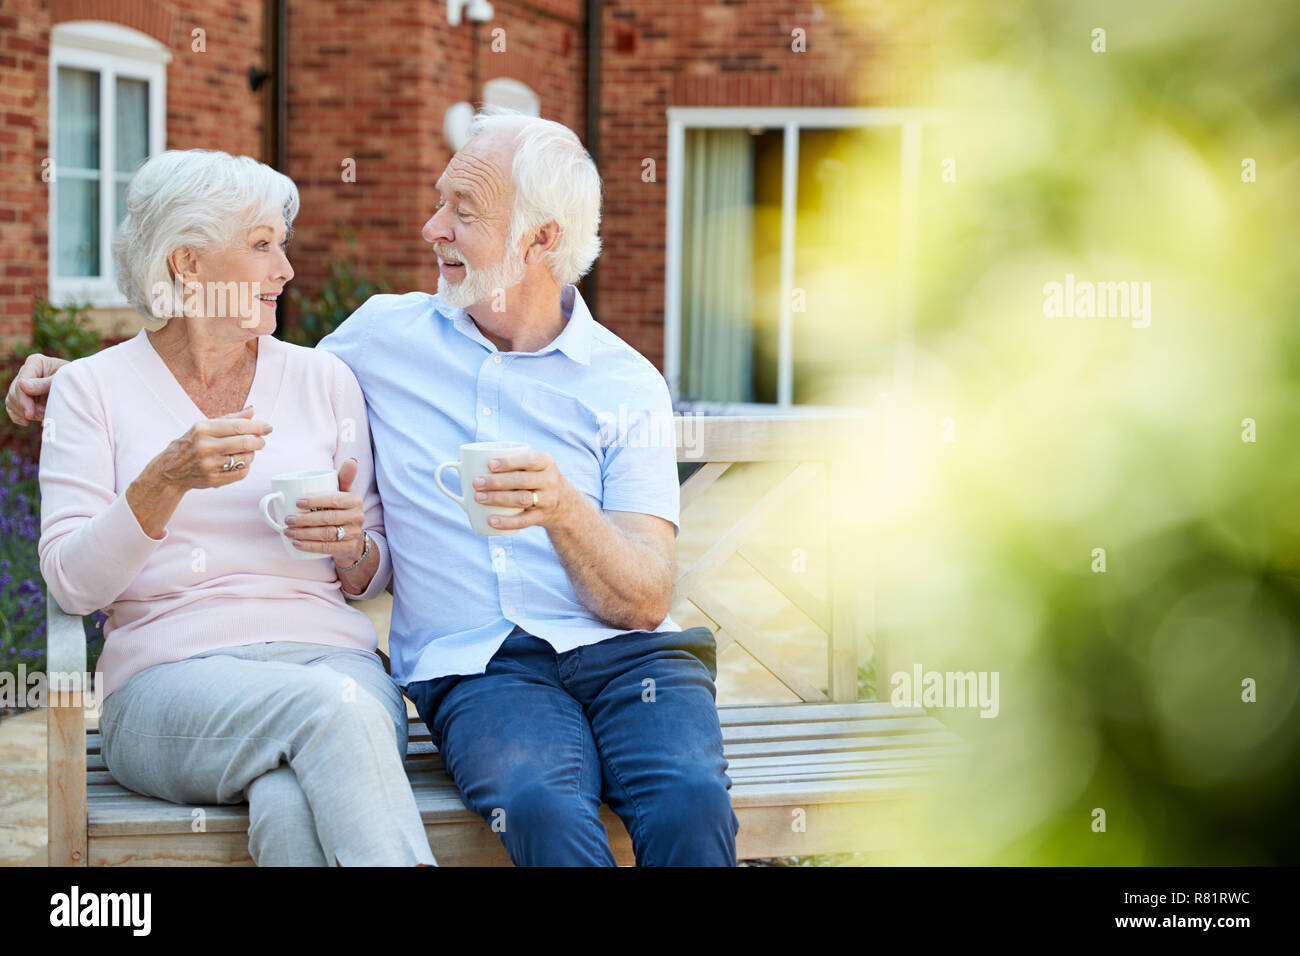 Retired Couple Sitting On Bench With Hot Drink In Assisted Living Facility Stock Photo